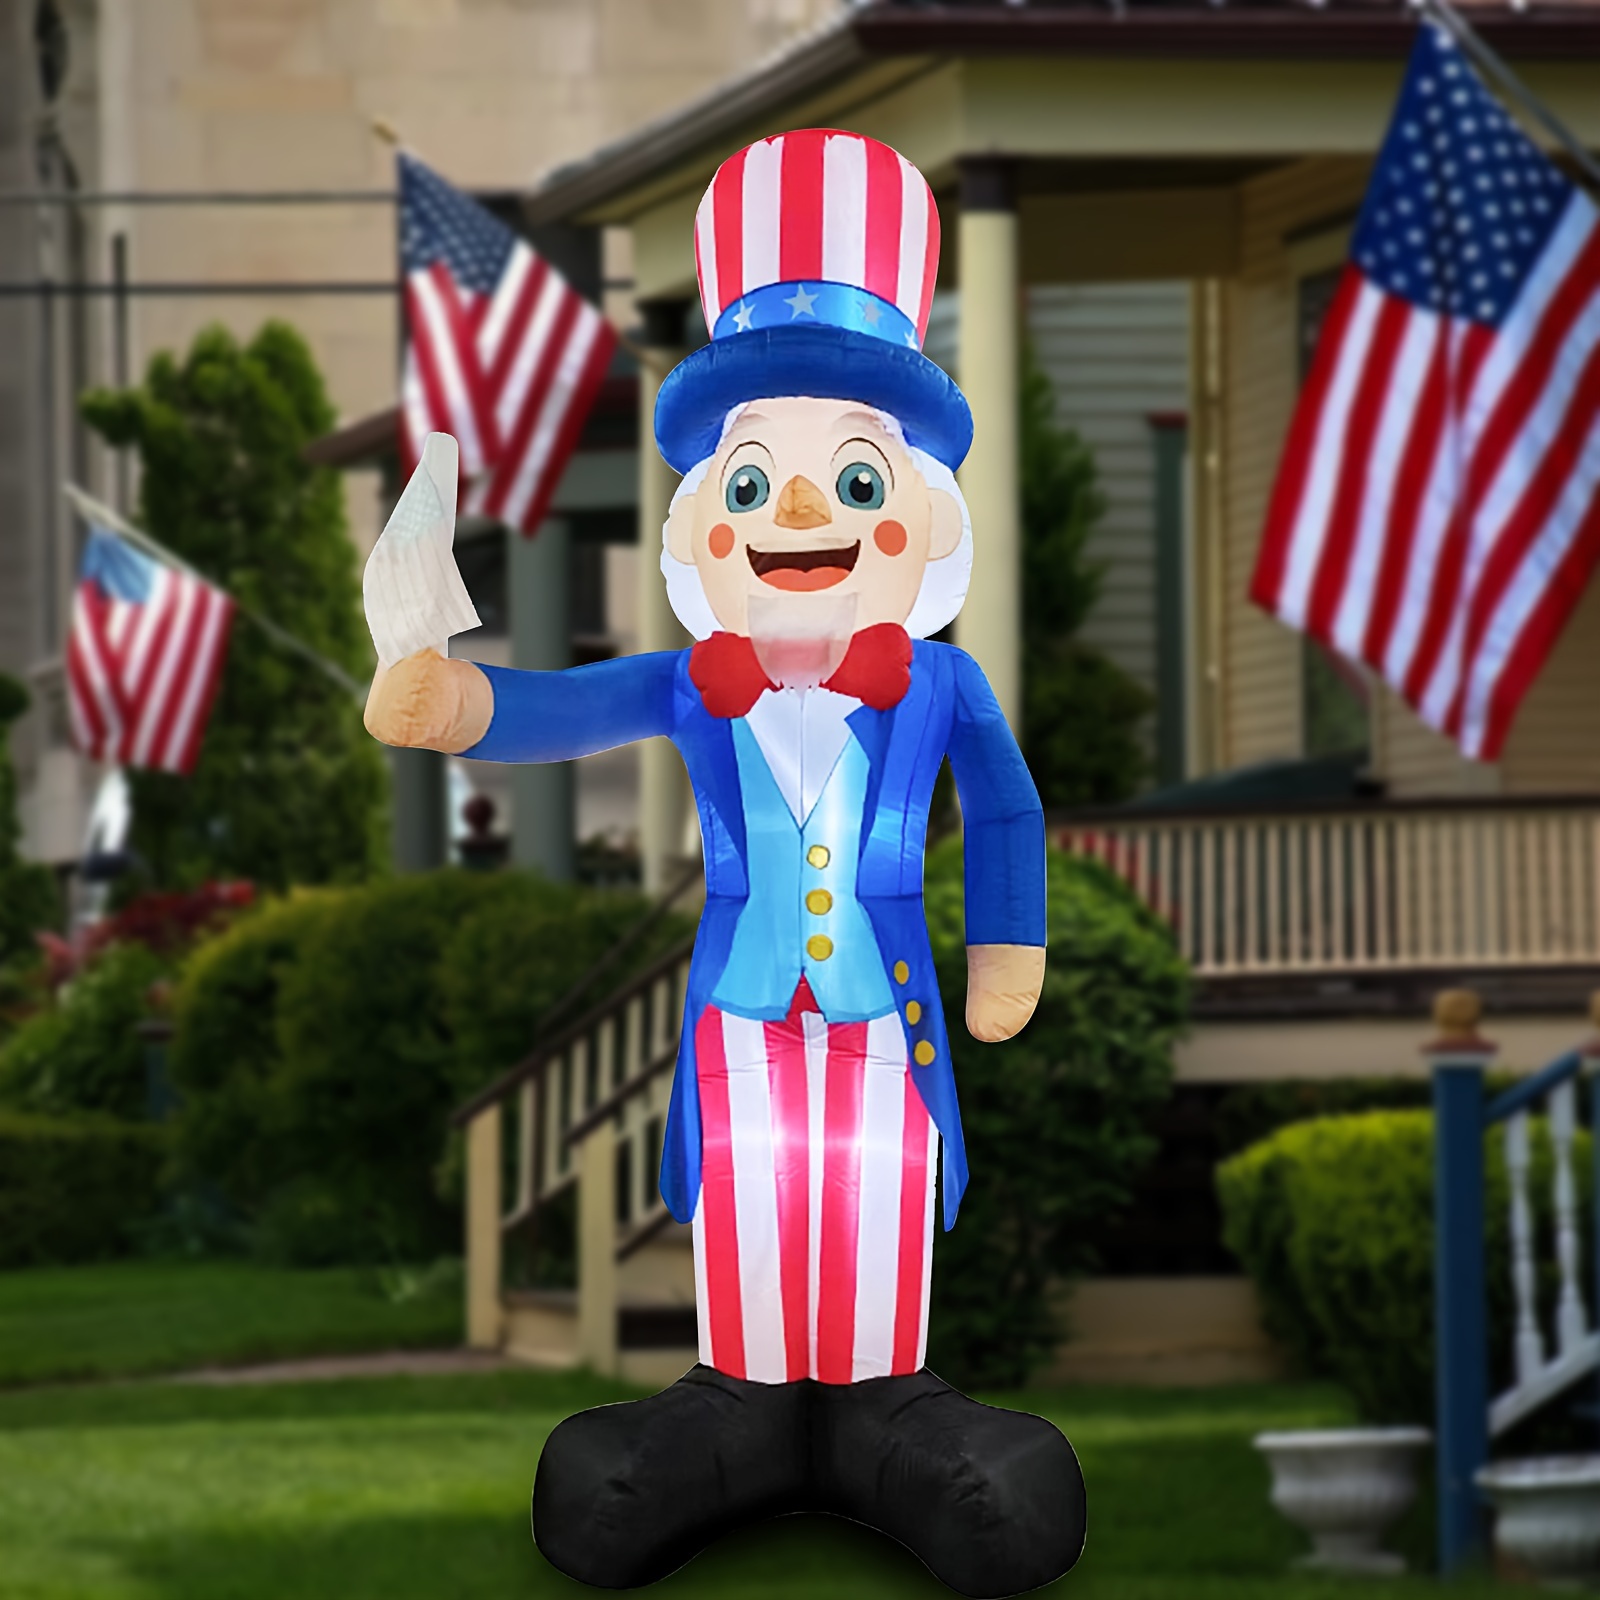 

Inflatable Lighted Standing Patriotic Outdoor Decor Outdoor Decoration With Built-in Led Lights